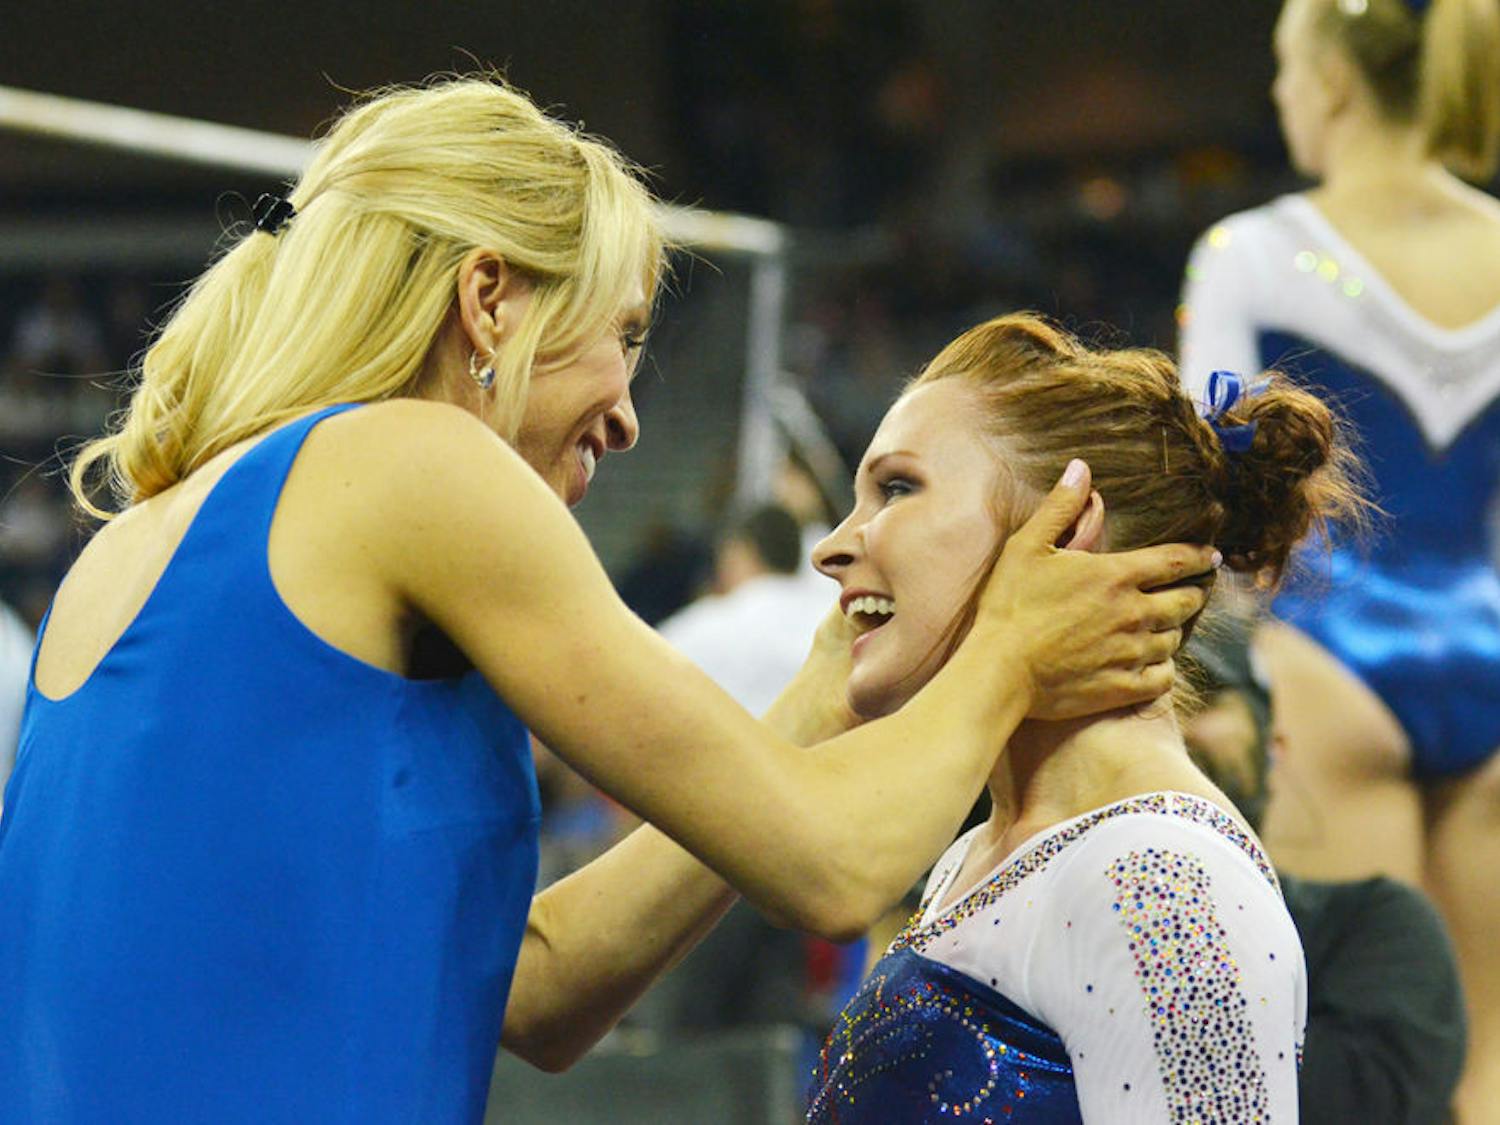 UF coach Rhonda Faehn (left) celebrates with Bridget Sloan during the 2015 Southeastern Conference Championships on March 21 in Duluth, Georgia.